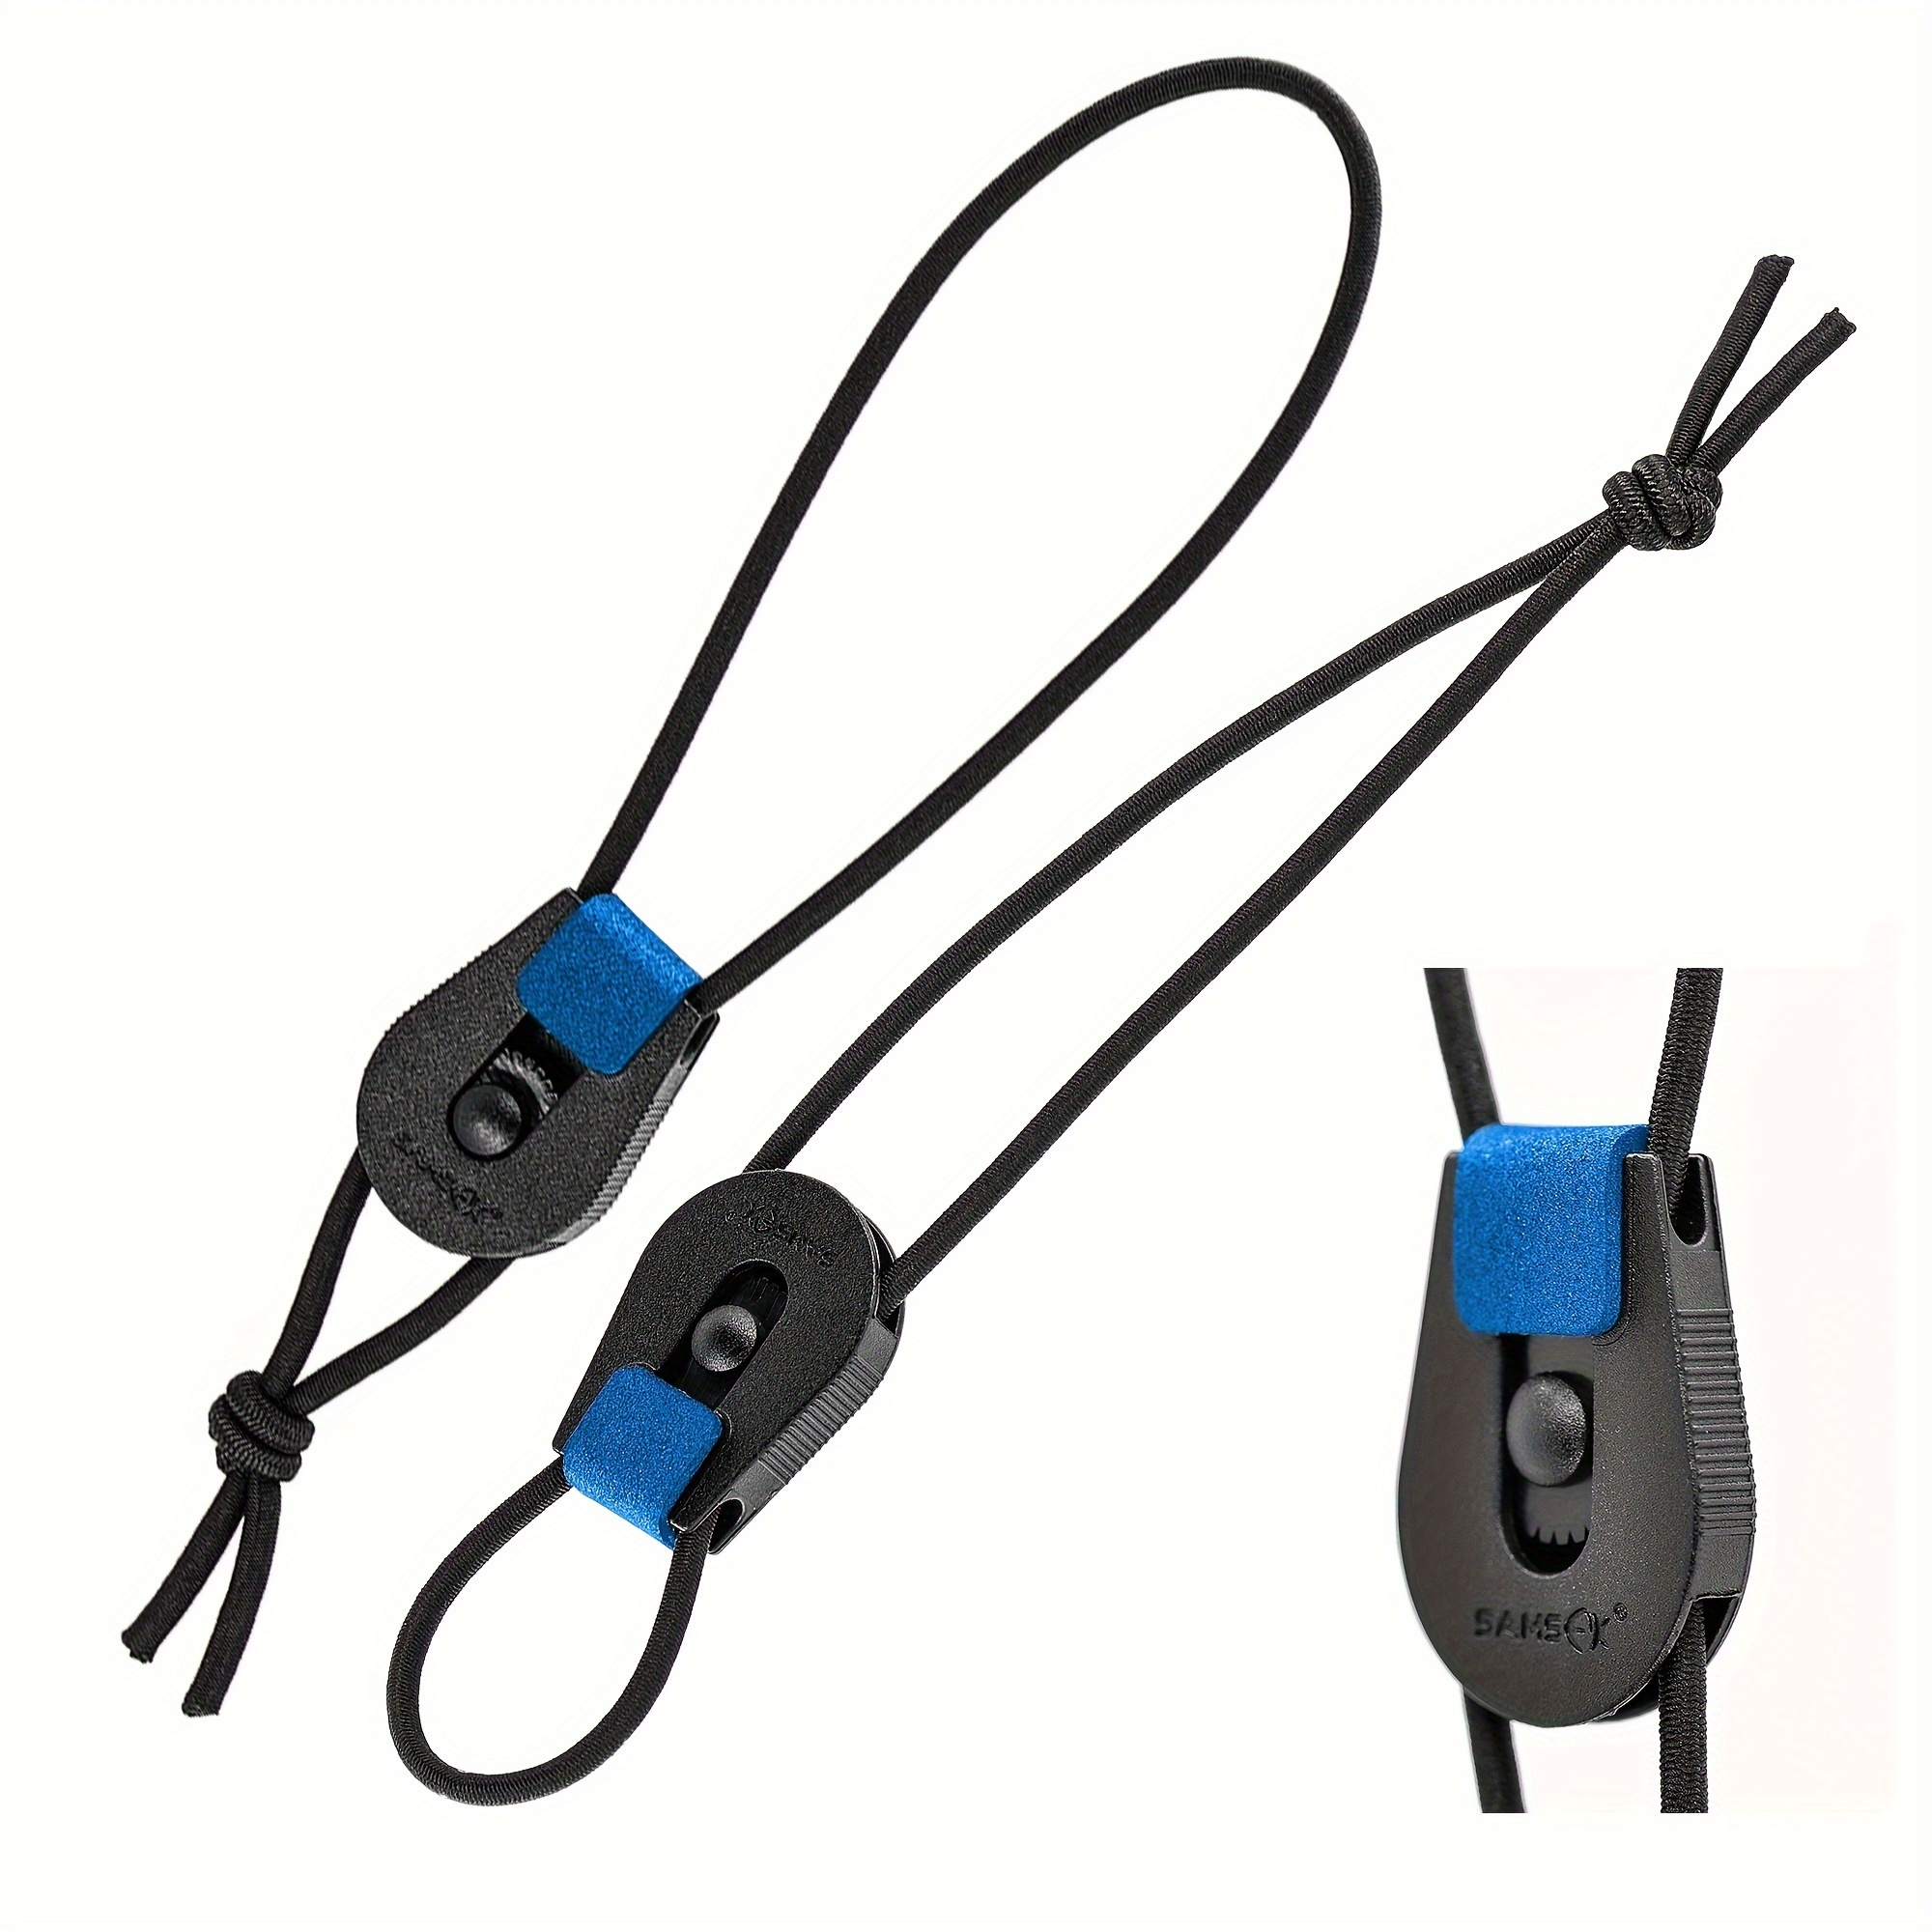 3pcs Fishing Rod Ties, Fishing Quick Rod Ties Leash for Pole Holders  Fishing Pole Organizer Straps Stretchy Cord Straps Fishing rods and  Accessories